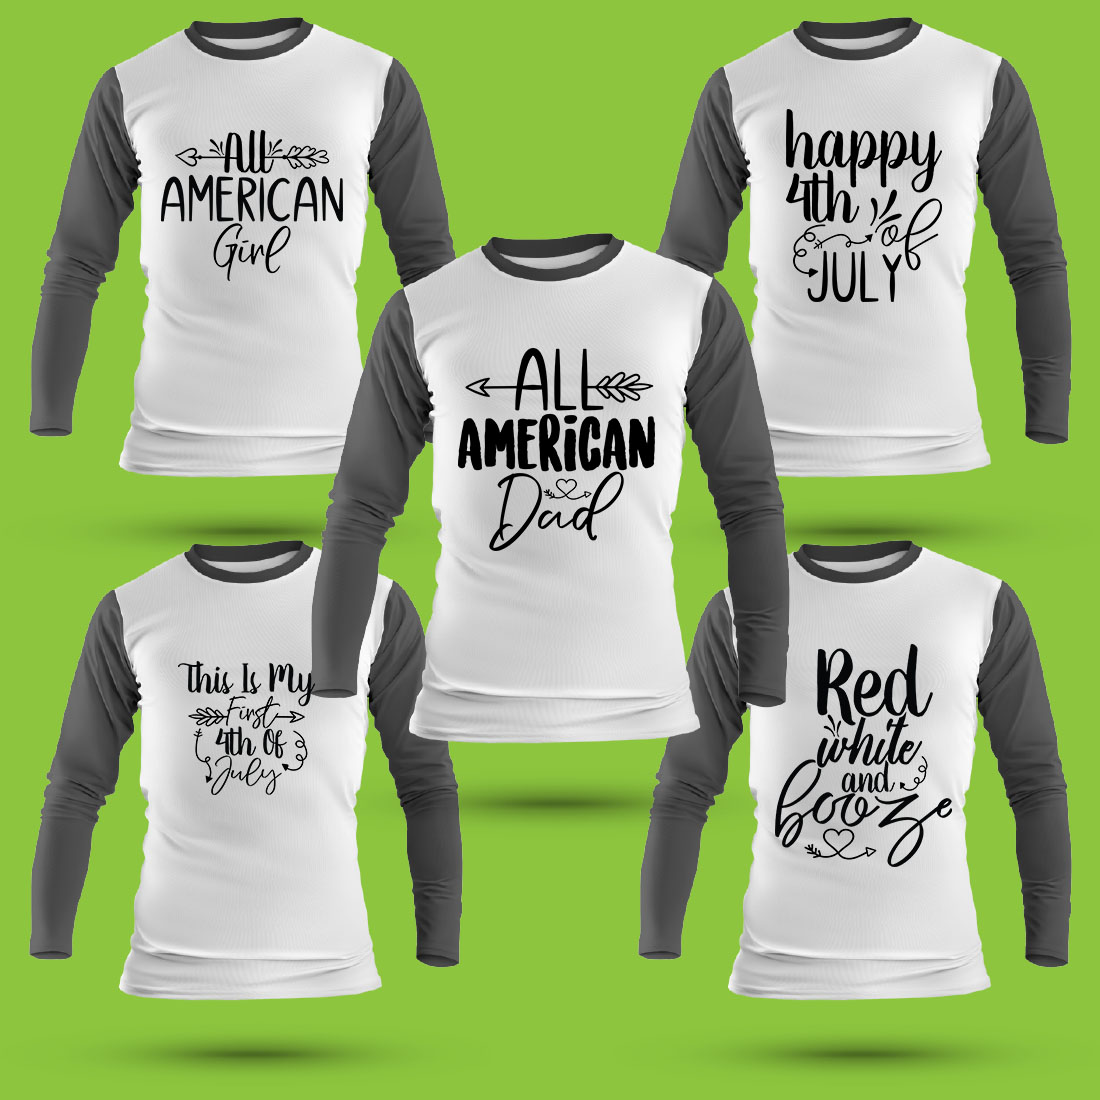 Set of four shirts with different sayings.